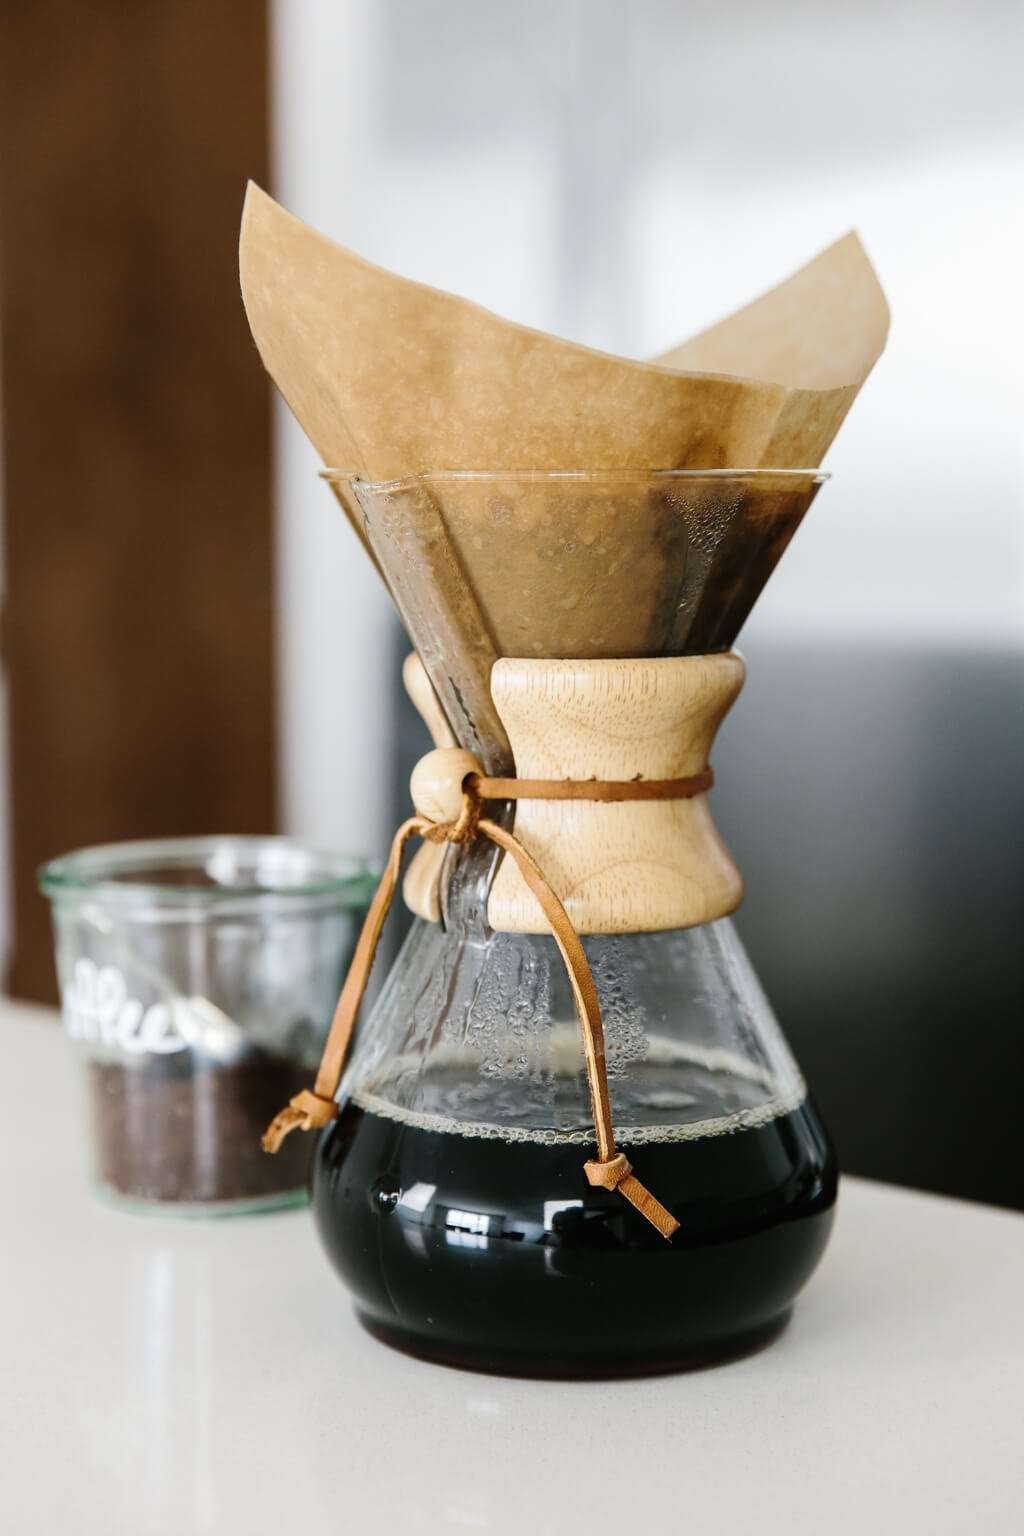 Chemex 101: Brewing Tips and Advice From a Coffee Novice ...